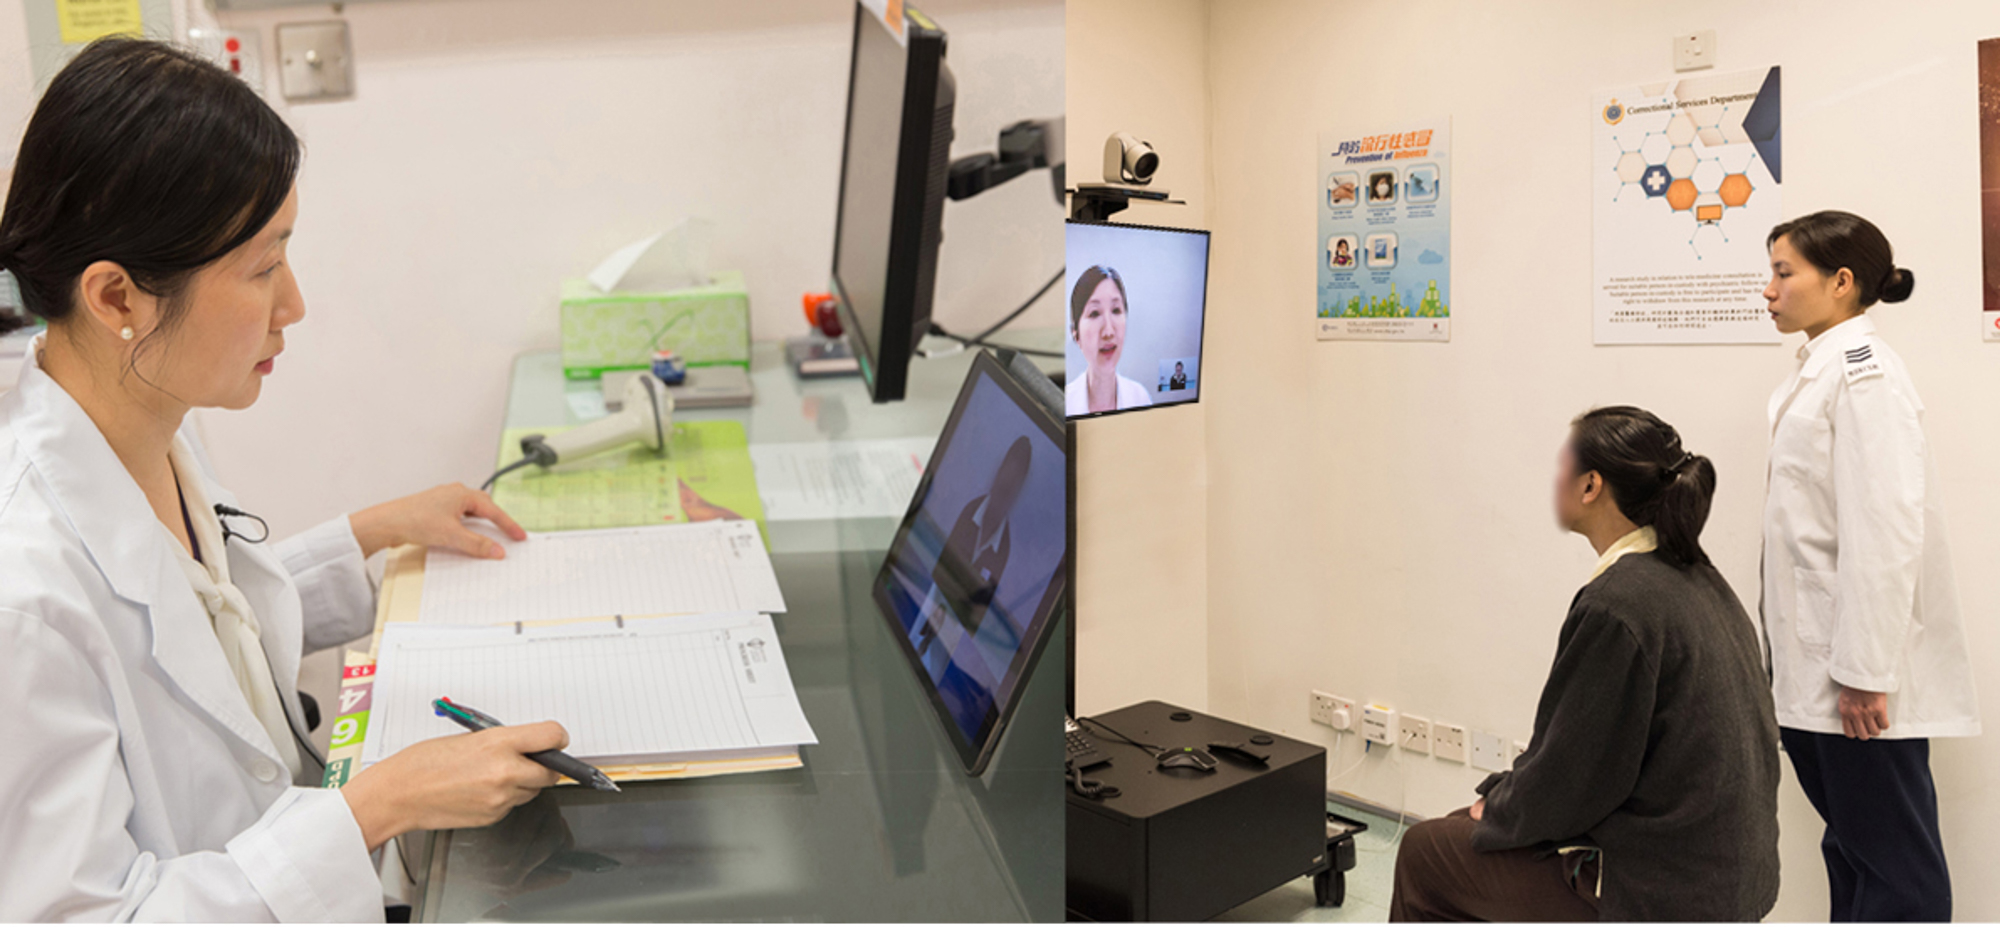 CSD has conducted a research study with Castle Peak Hospital and Kwai Chung Hospital on the provision of psychiatric telemedicine consultation.